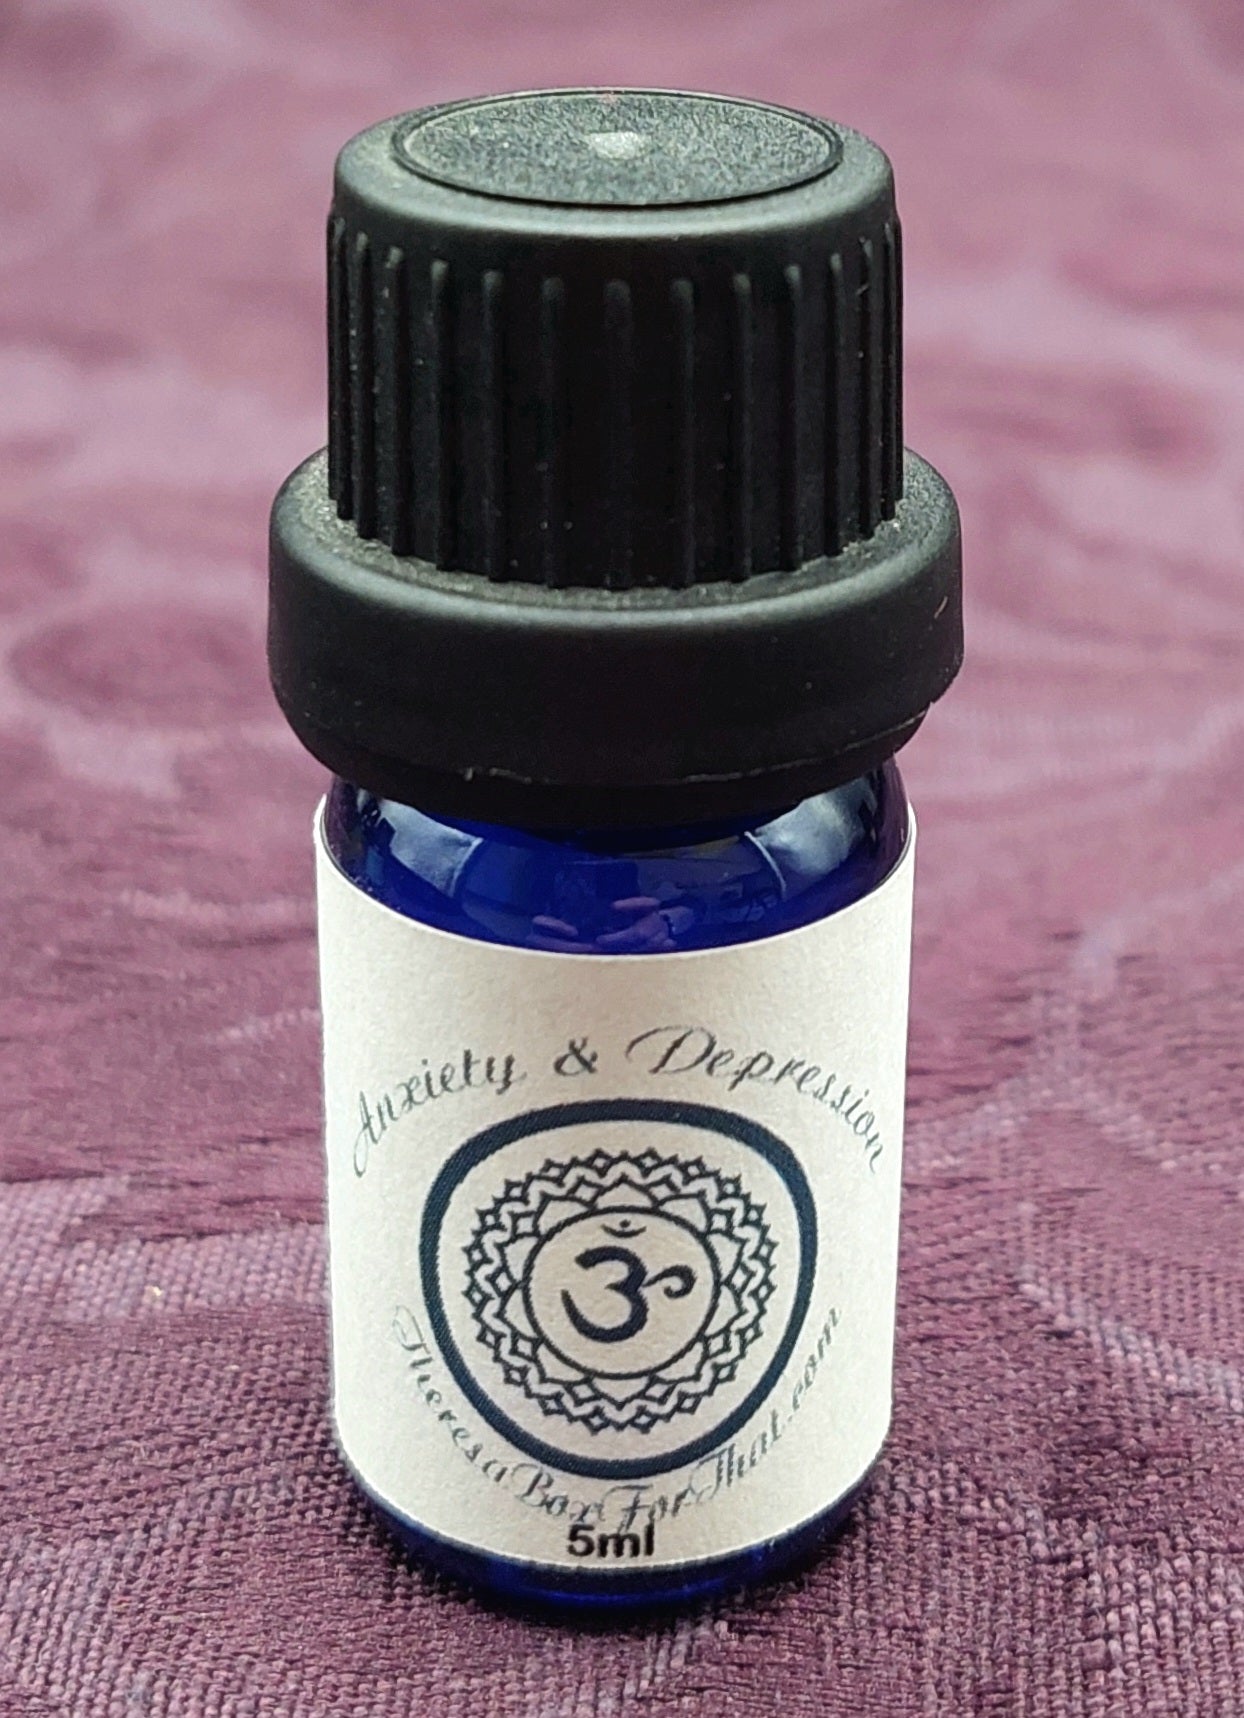 The Spirit Within Essential Oils